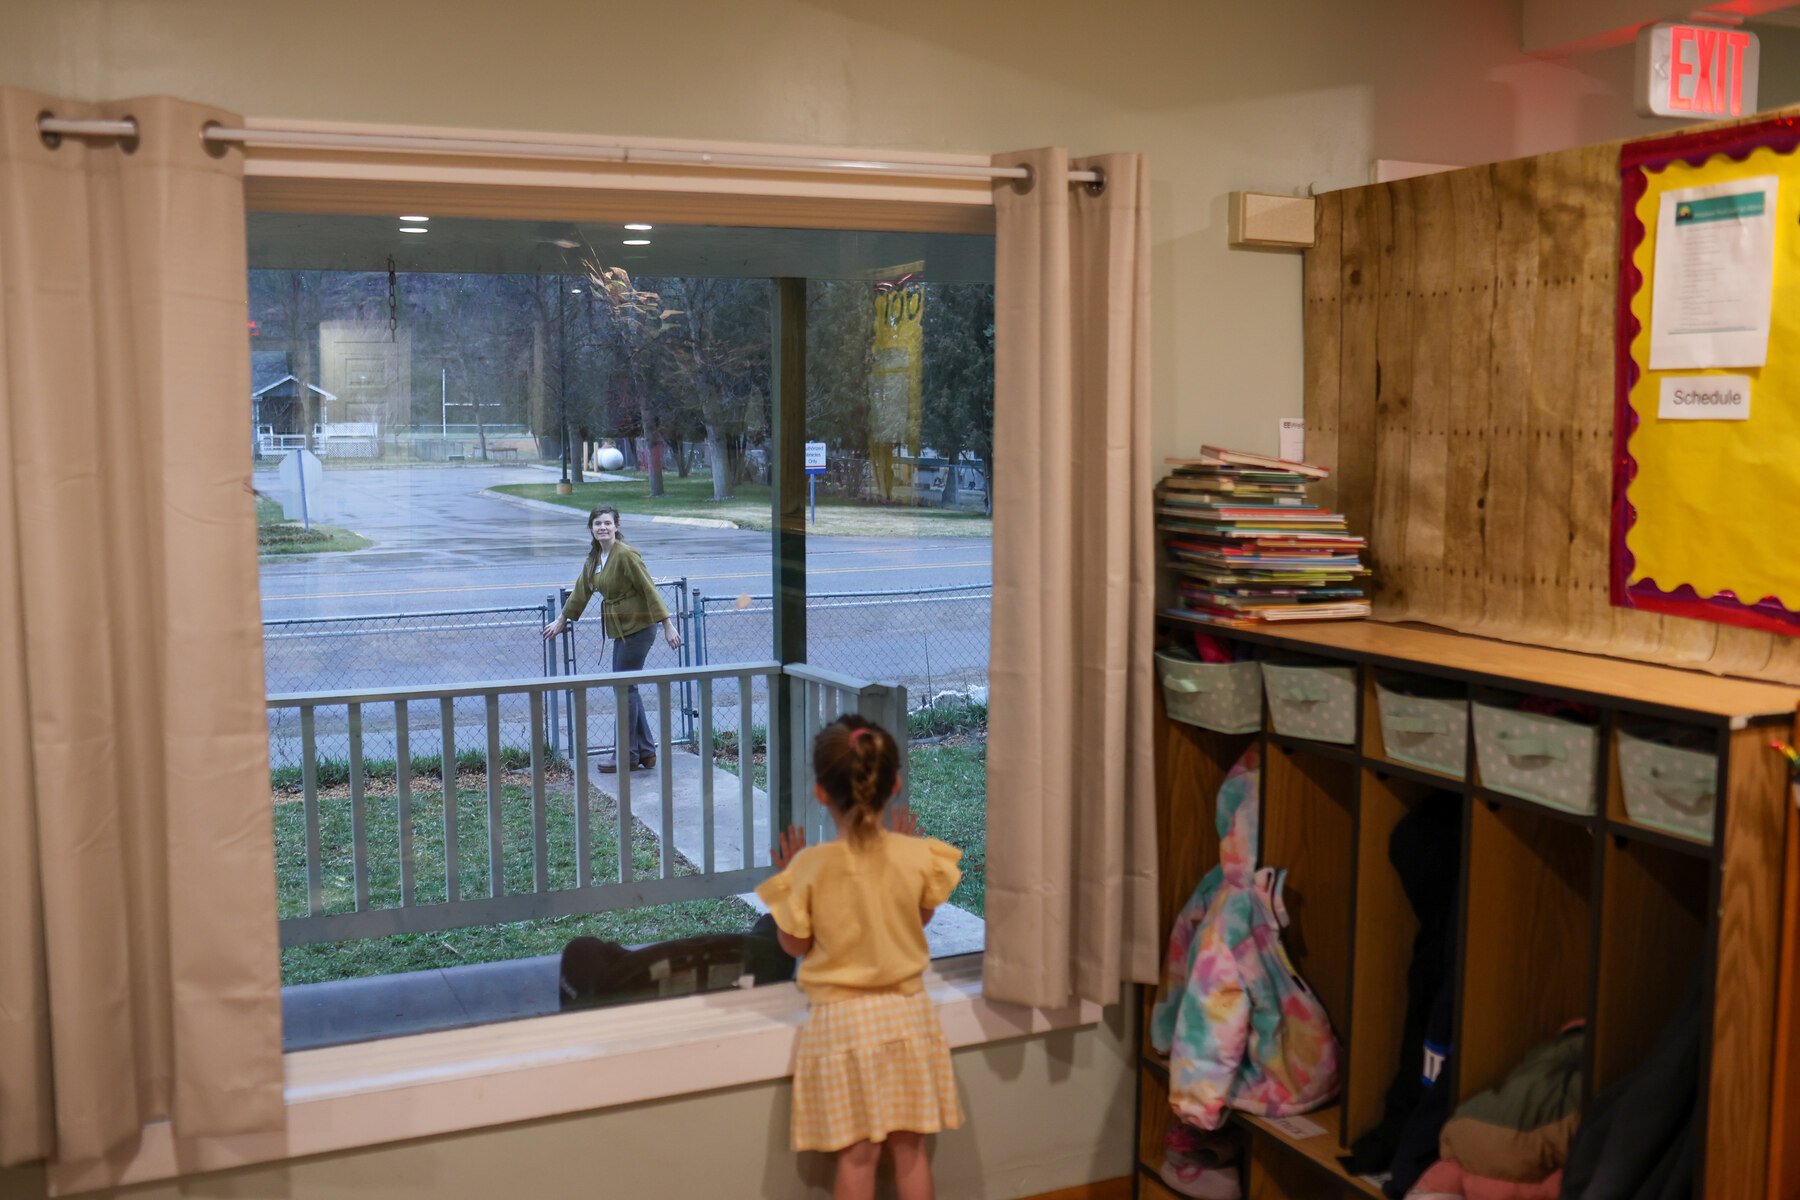 A preschool student watches her mom leave from a window after dropping her off at day care.